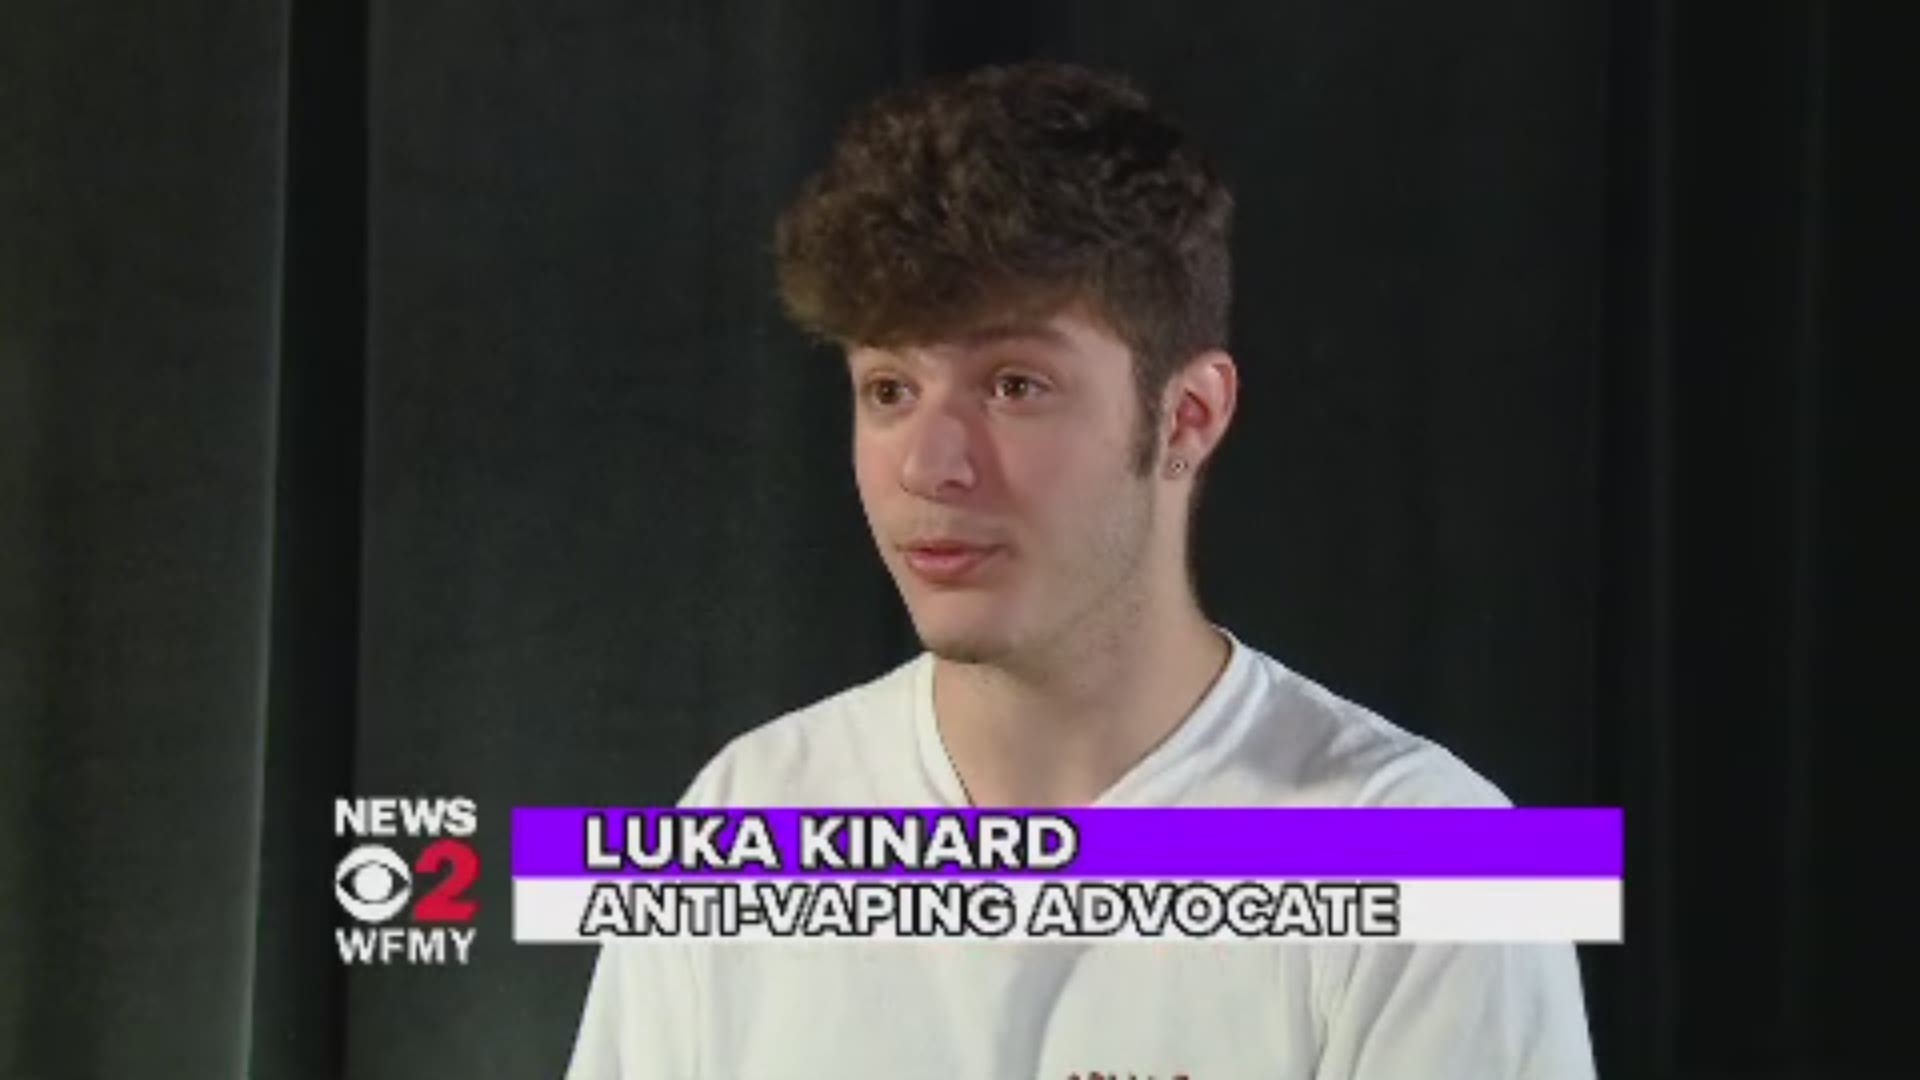 At 15, Luka became addicted to e-cigarettes and spent 40 days in a rehabilitation program to overcome his addiction. He now encourages others to use healthier ways to relieve stress. Vaping changed his life and not in a good way, he says. He says vaping every waking hour changed his life. "It affected my health so much," Kinard said. "I threw away sports, academics family, friends church, everything that was healthy in my life. I was just treating it like it was nothing."